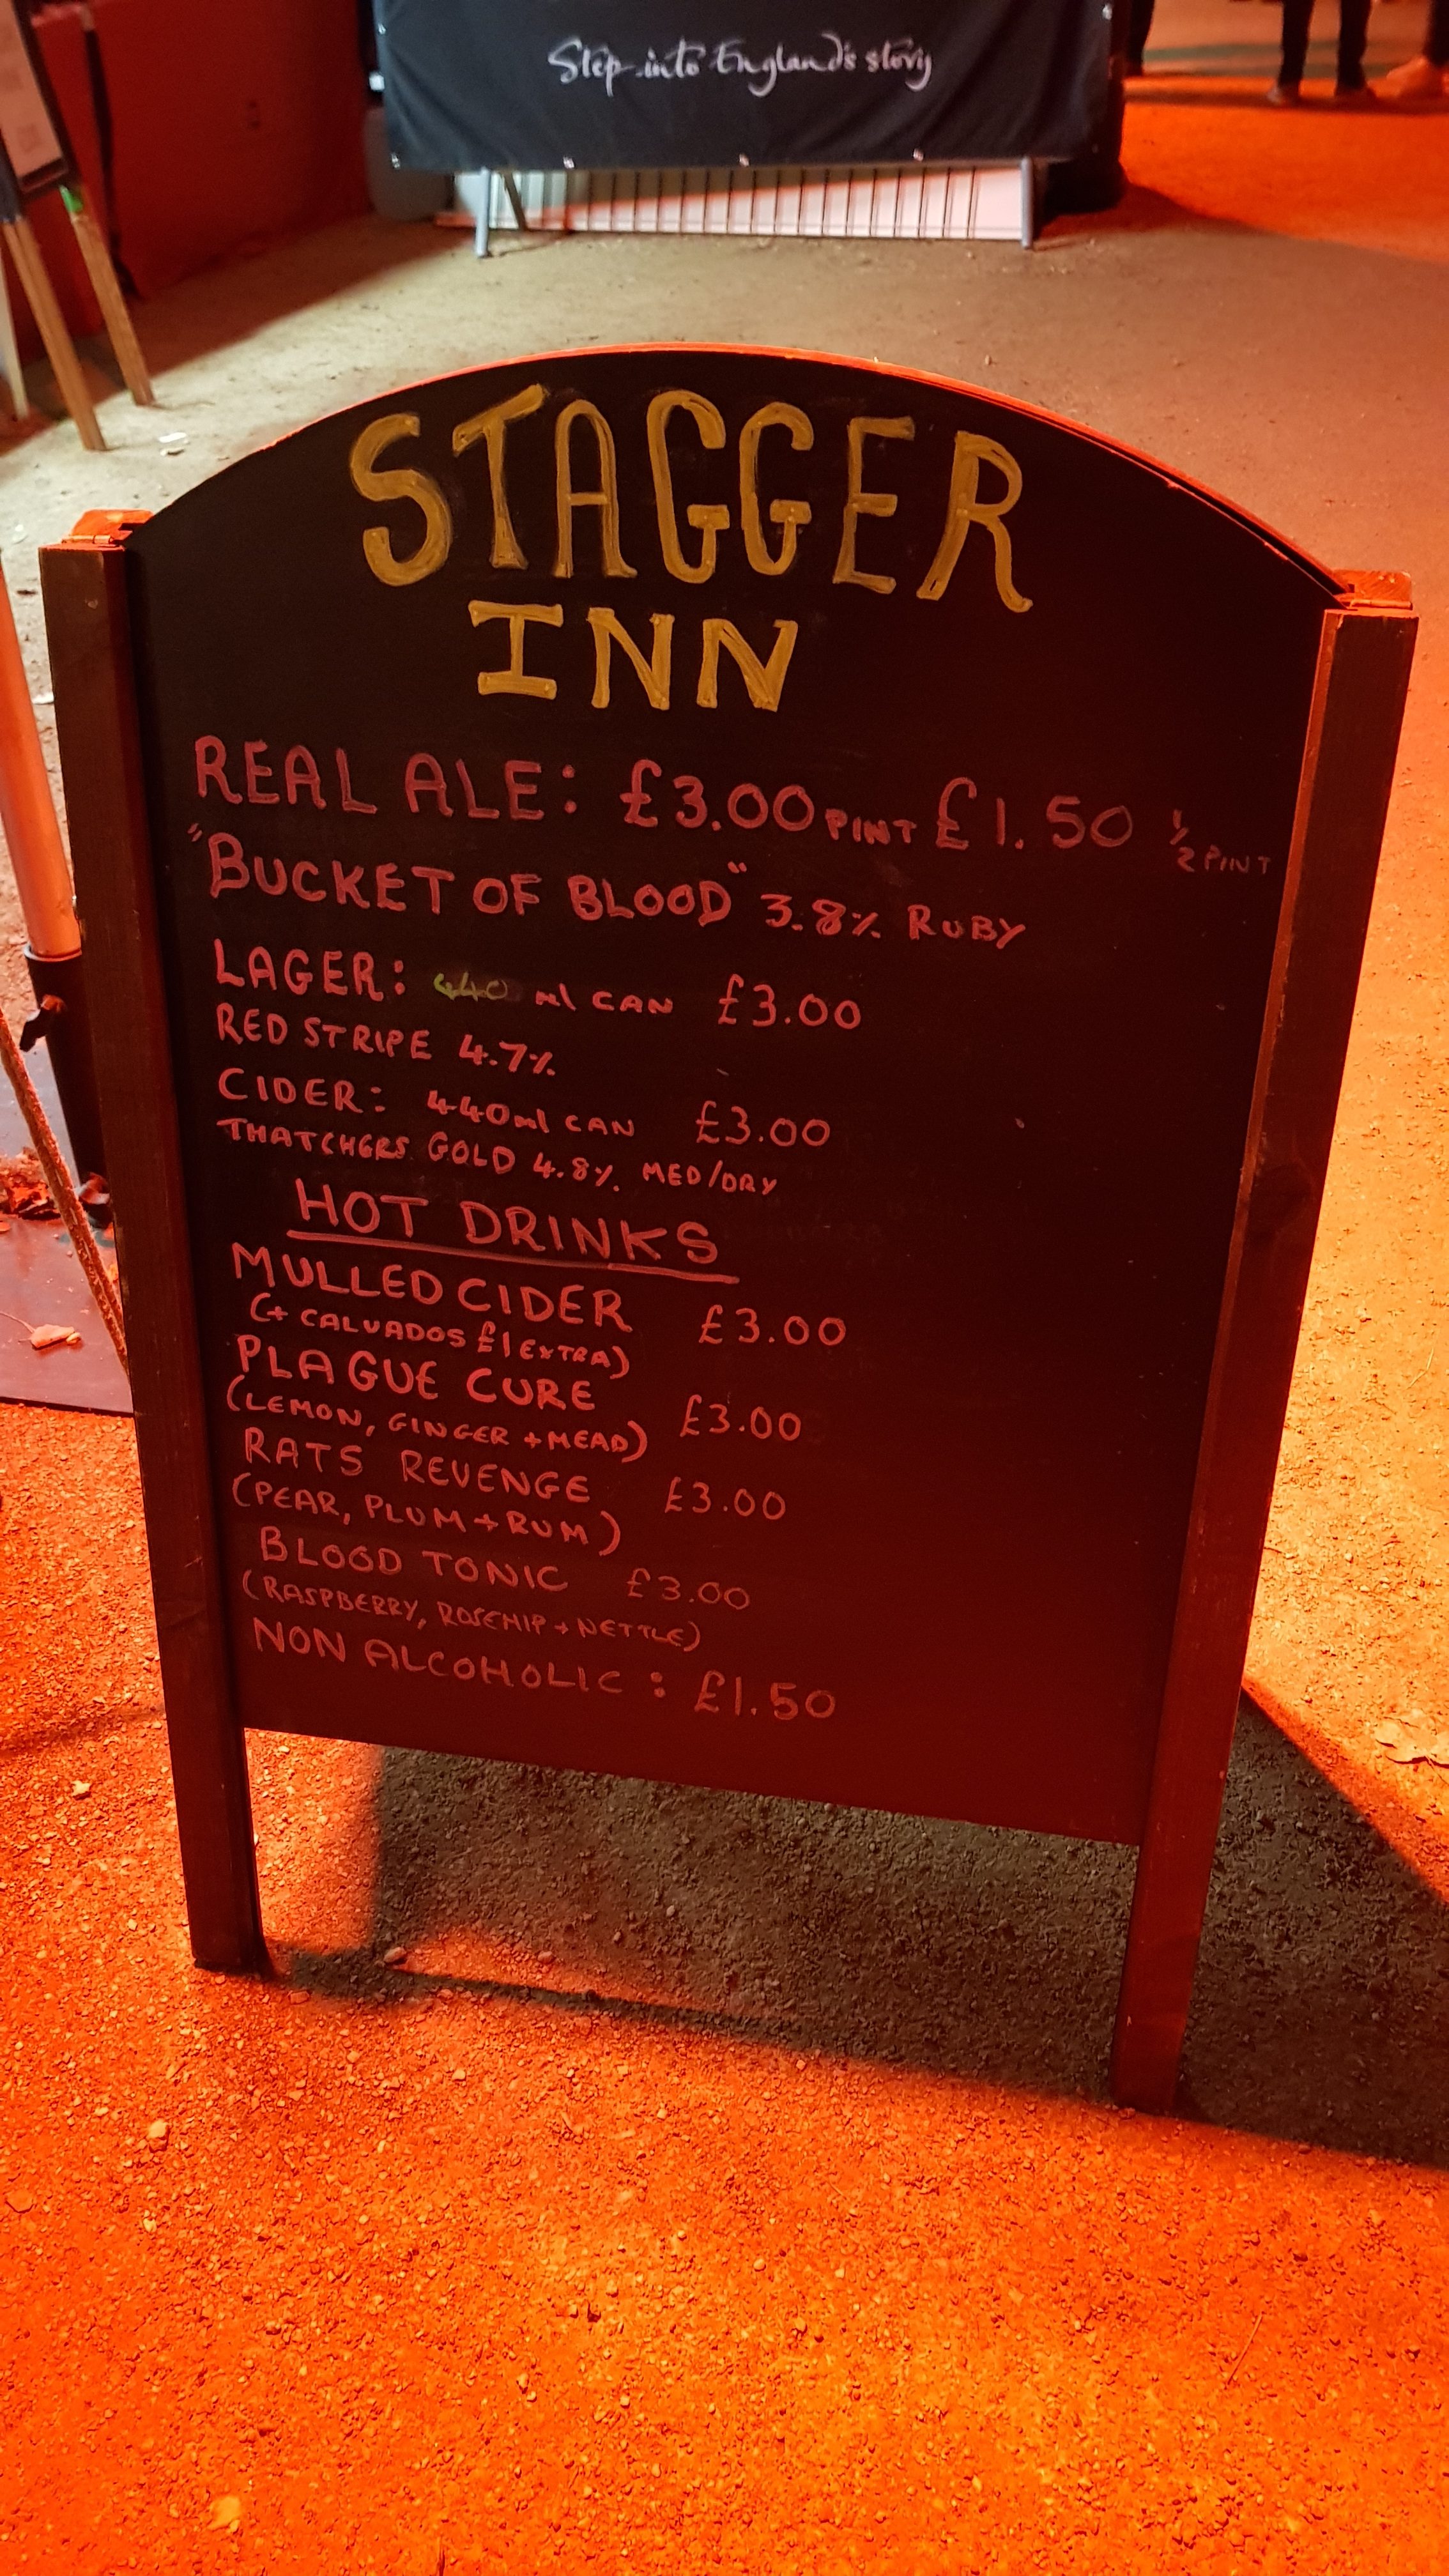 A board with the Stagger Inn menu. Real Ale, 'Bucket of Blood' £3 pint, £1.50 1/2 pint, Lager, Red Strip £3 440ml can, Cider, Thatchers Gold £3 440ml can, Hot Drinks. Mulled Cider £3, Plague Cure (lemon, ginger and mead) £3, Rats Revenge (Pear, plum and Rum) £3 Blood Tonic (Raspberry, Rosehip and Nettle) £3, Non alcoholic £1.50